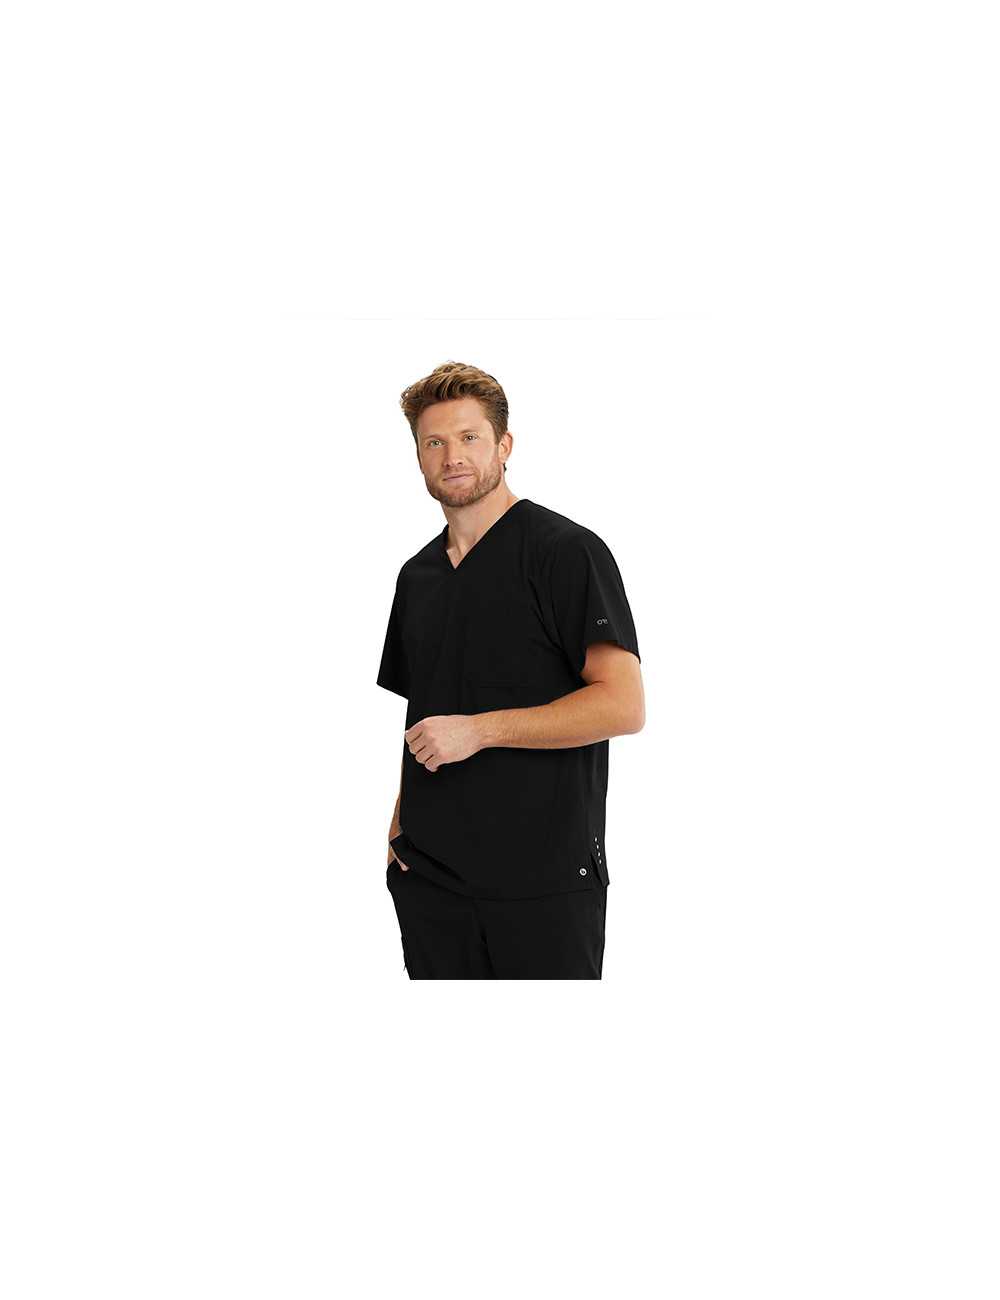 Men's Medical Gown, Barco One (BOT040)